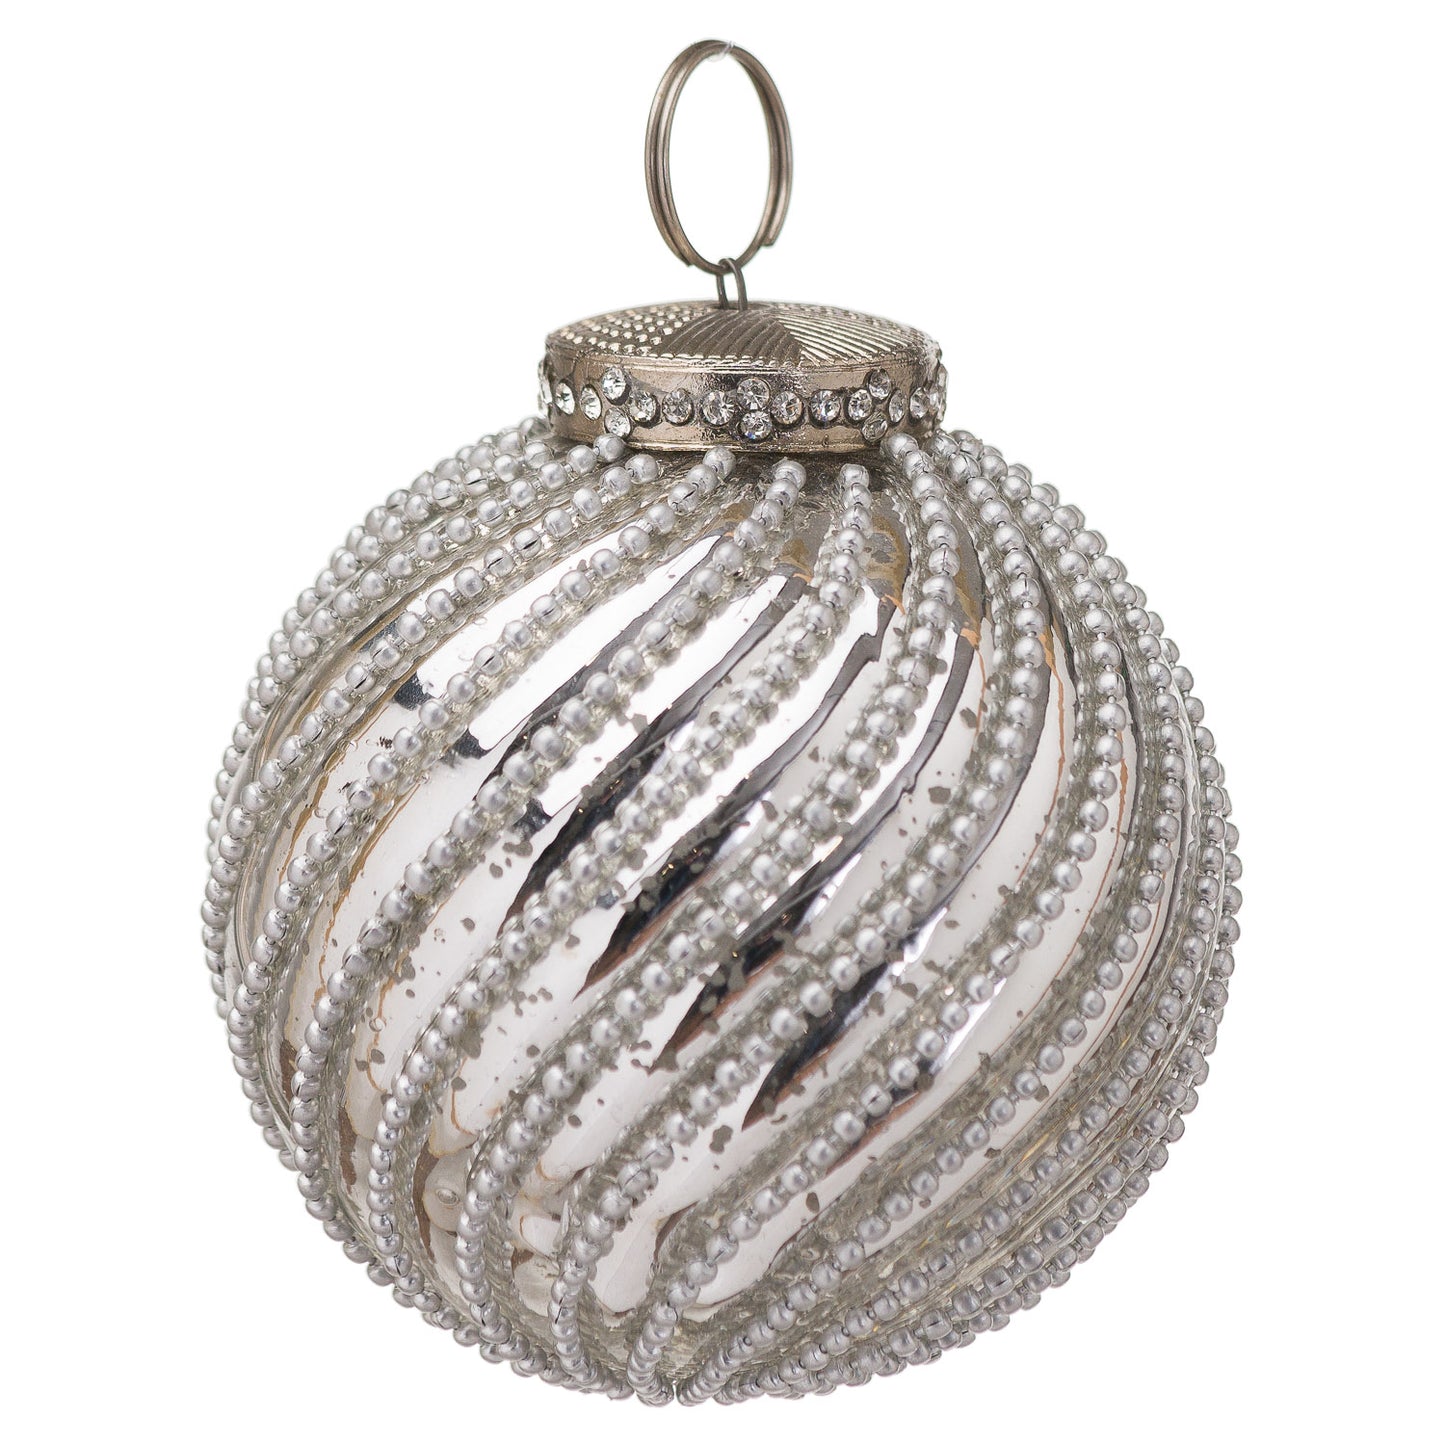 The Noel Collection Silver Jewel Swirl Large Bauble